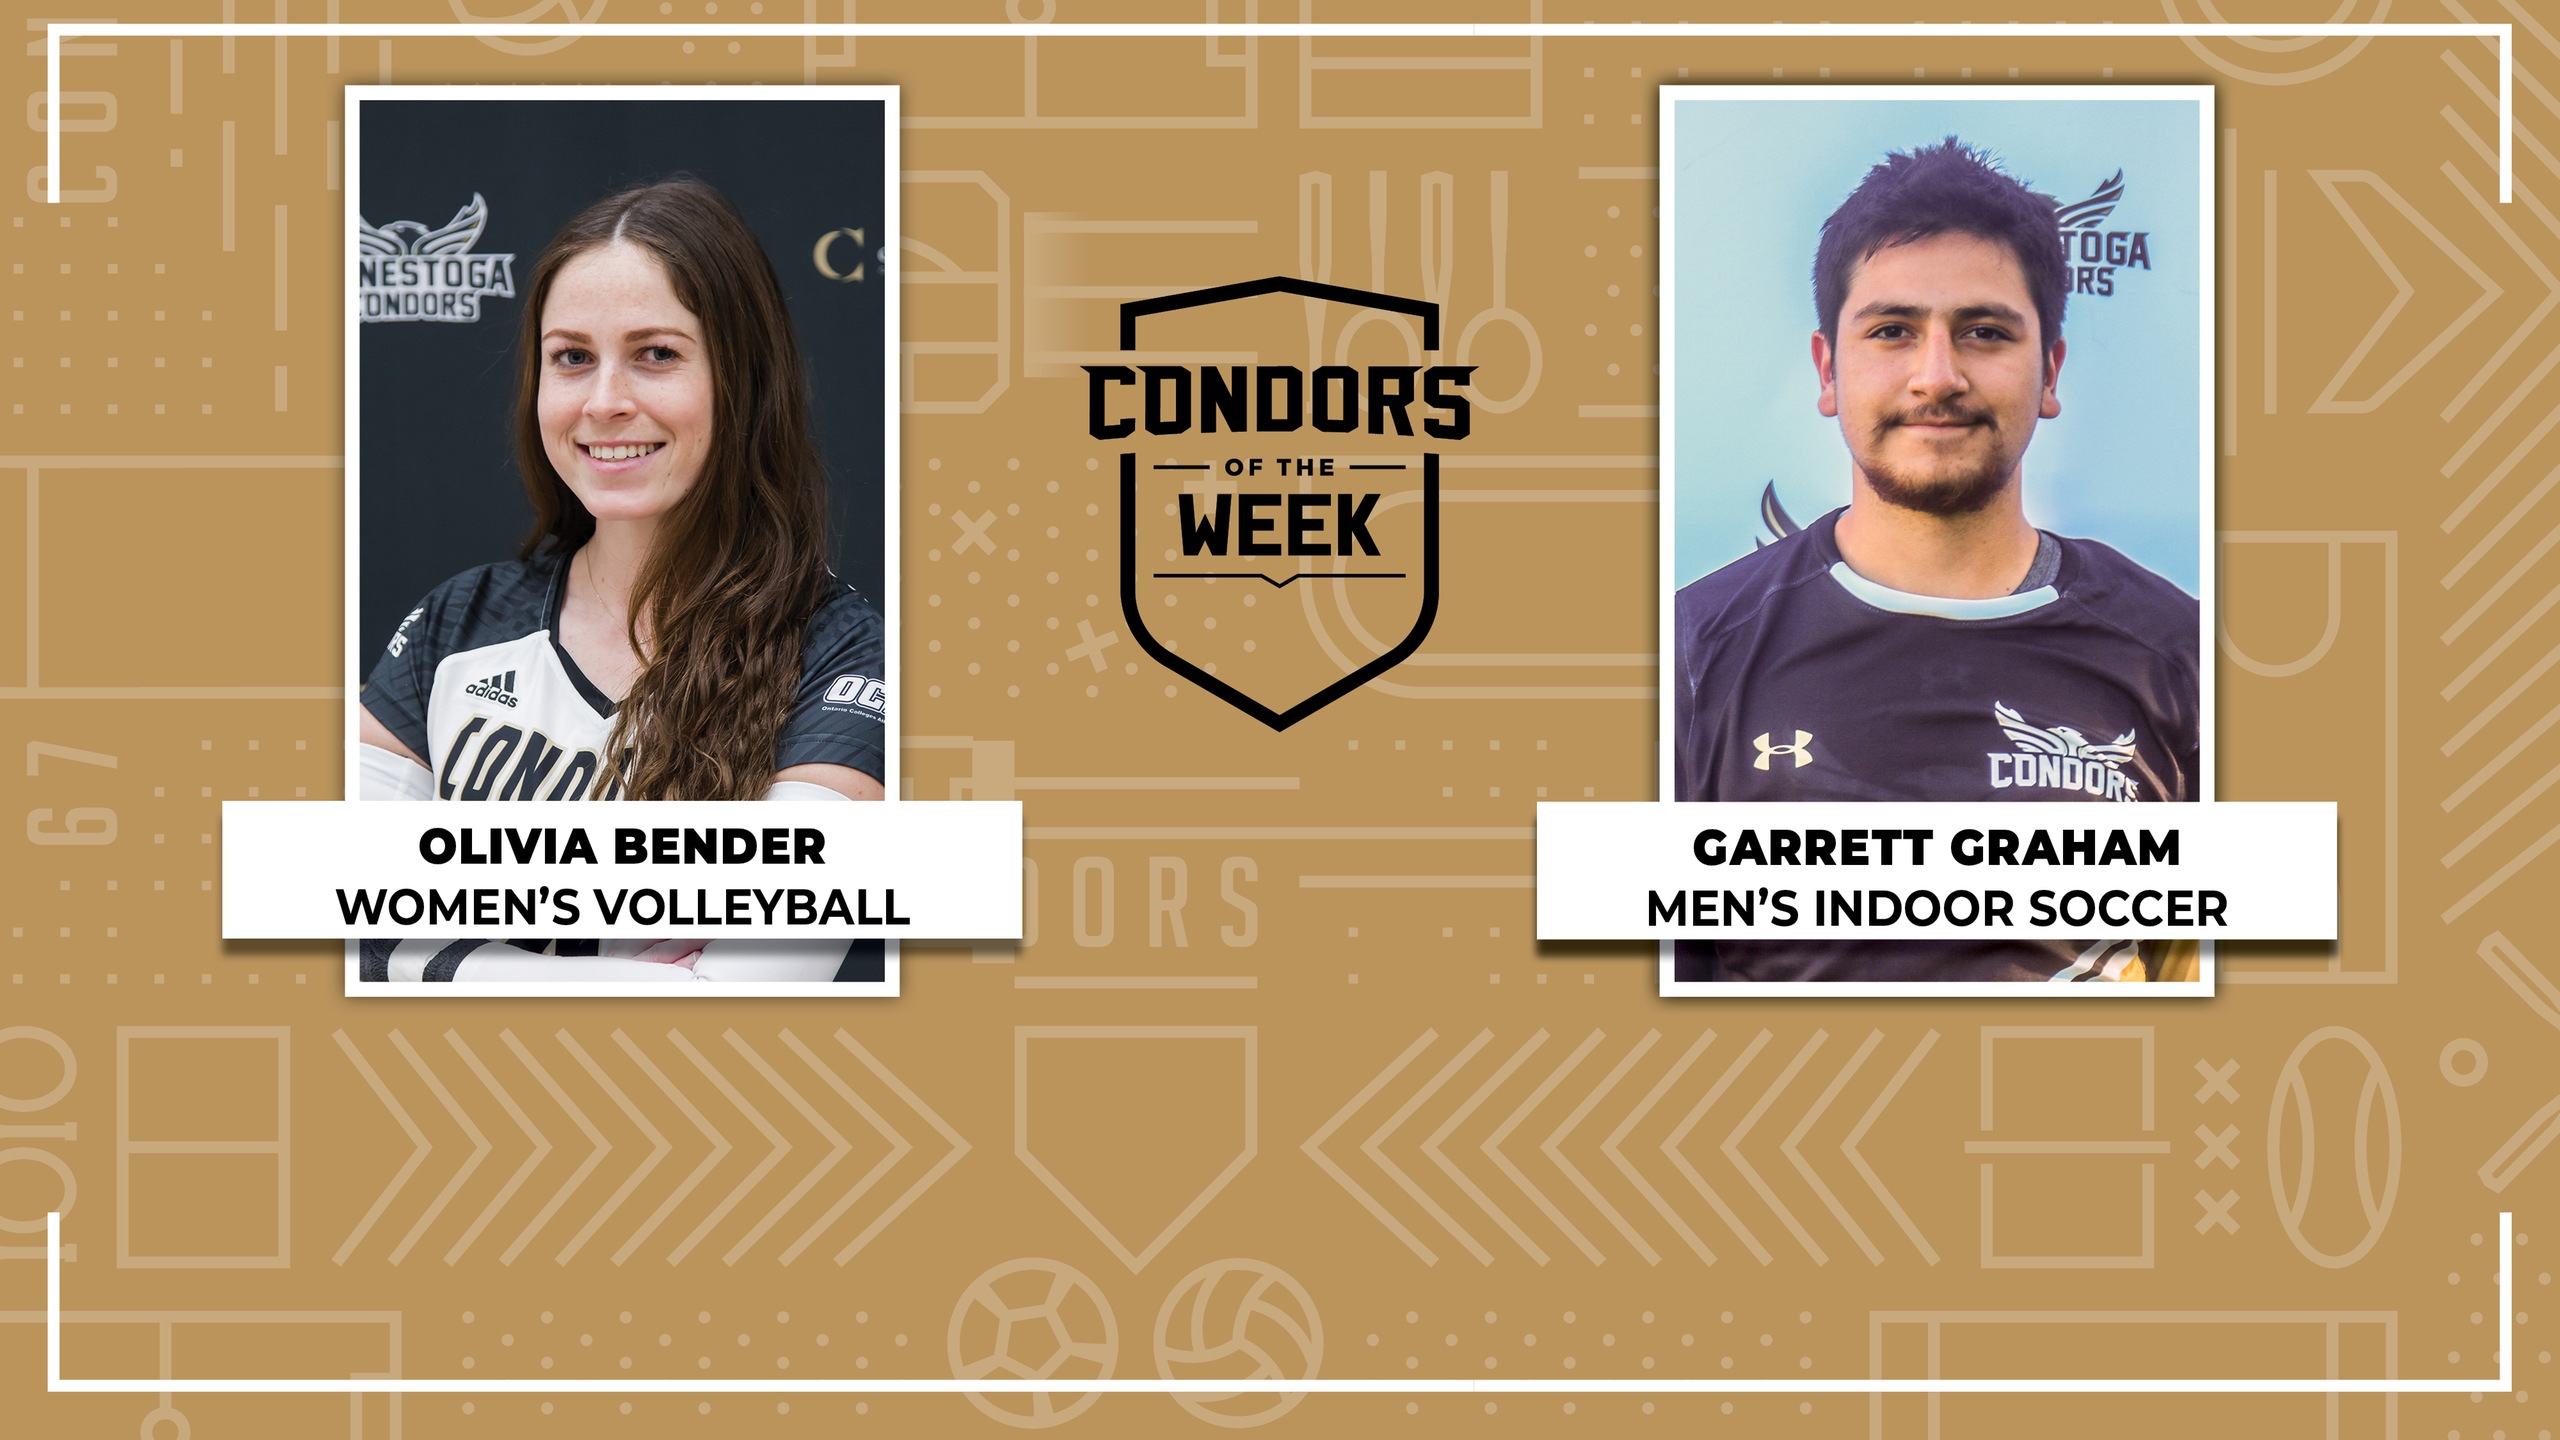 Bender &amp; Graham are Condors Of The Week!